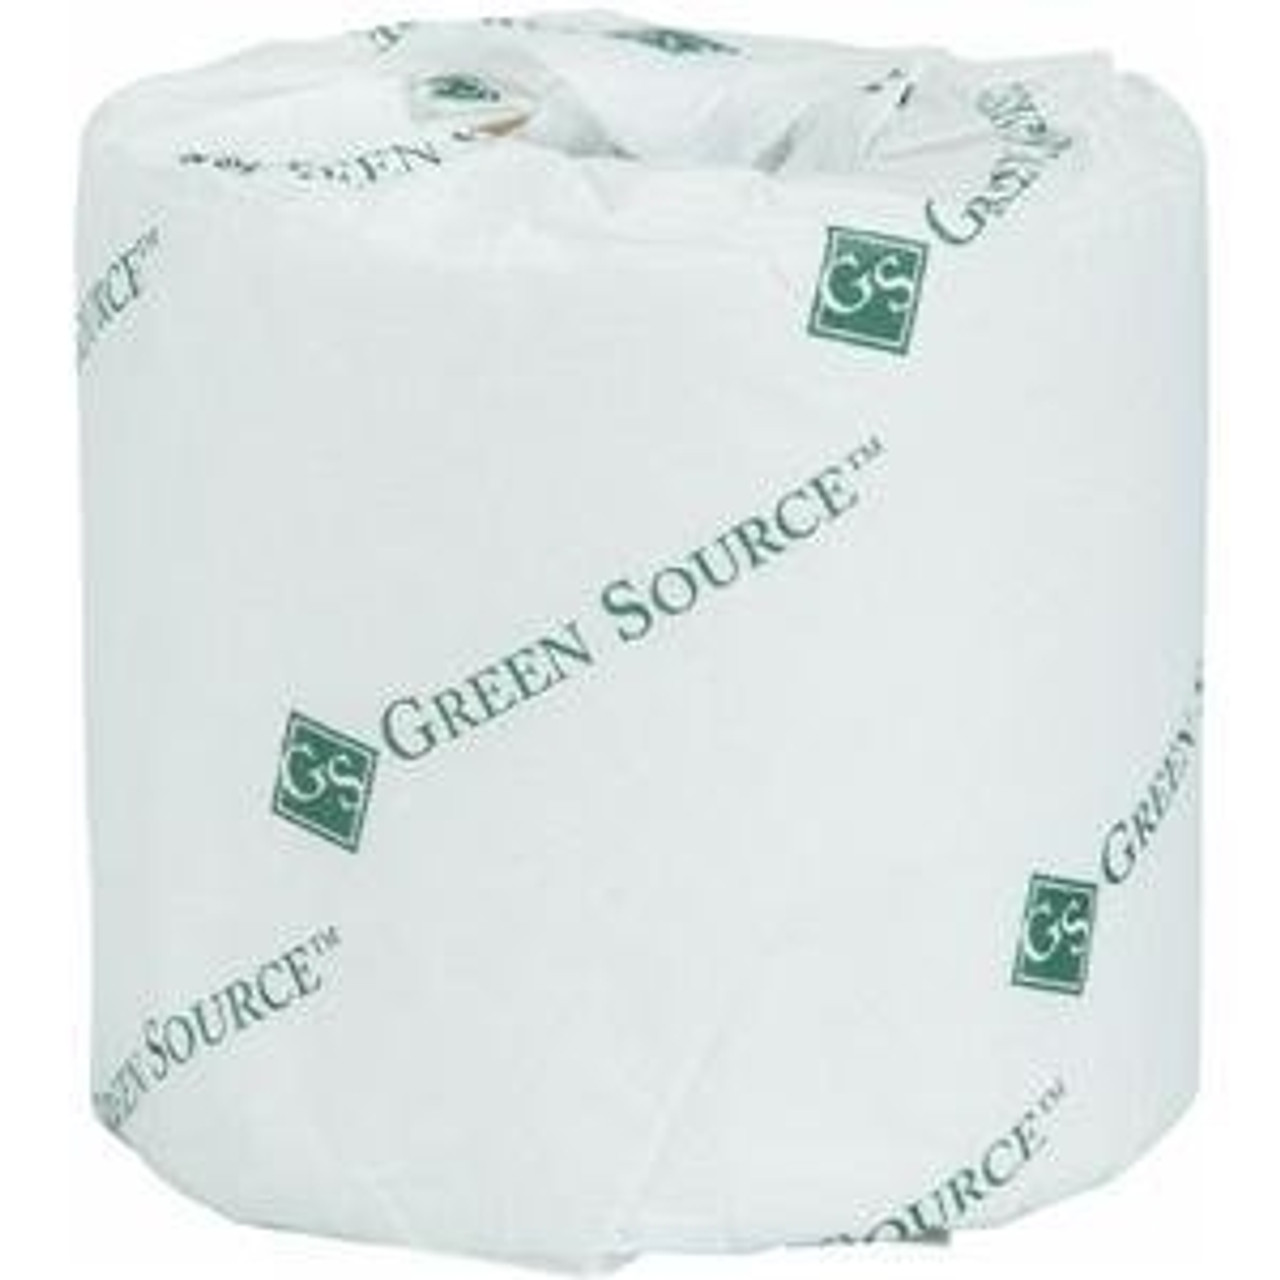 Standard Bathroom Tissue exceeds the most stringent environmental standards. Ideal for use in offices, industrial facilities, schools, hotels, hospitals, food service and more. Made from 100% recycled material, with minimum 60% post-consumer content. White color finish. 500 sheets per roll, sold 96 rolls per case.